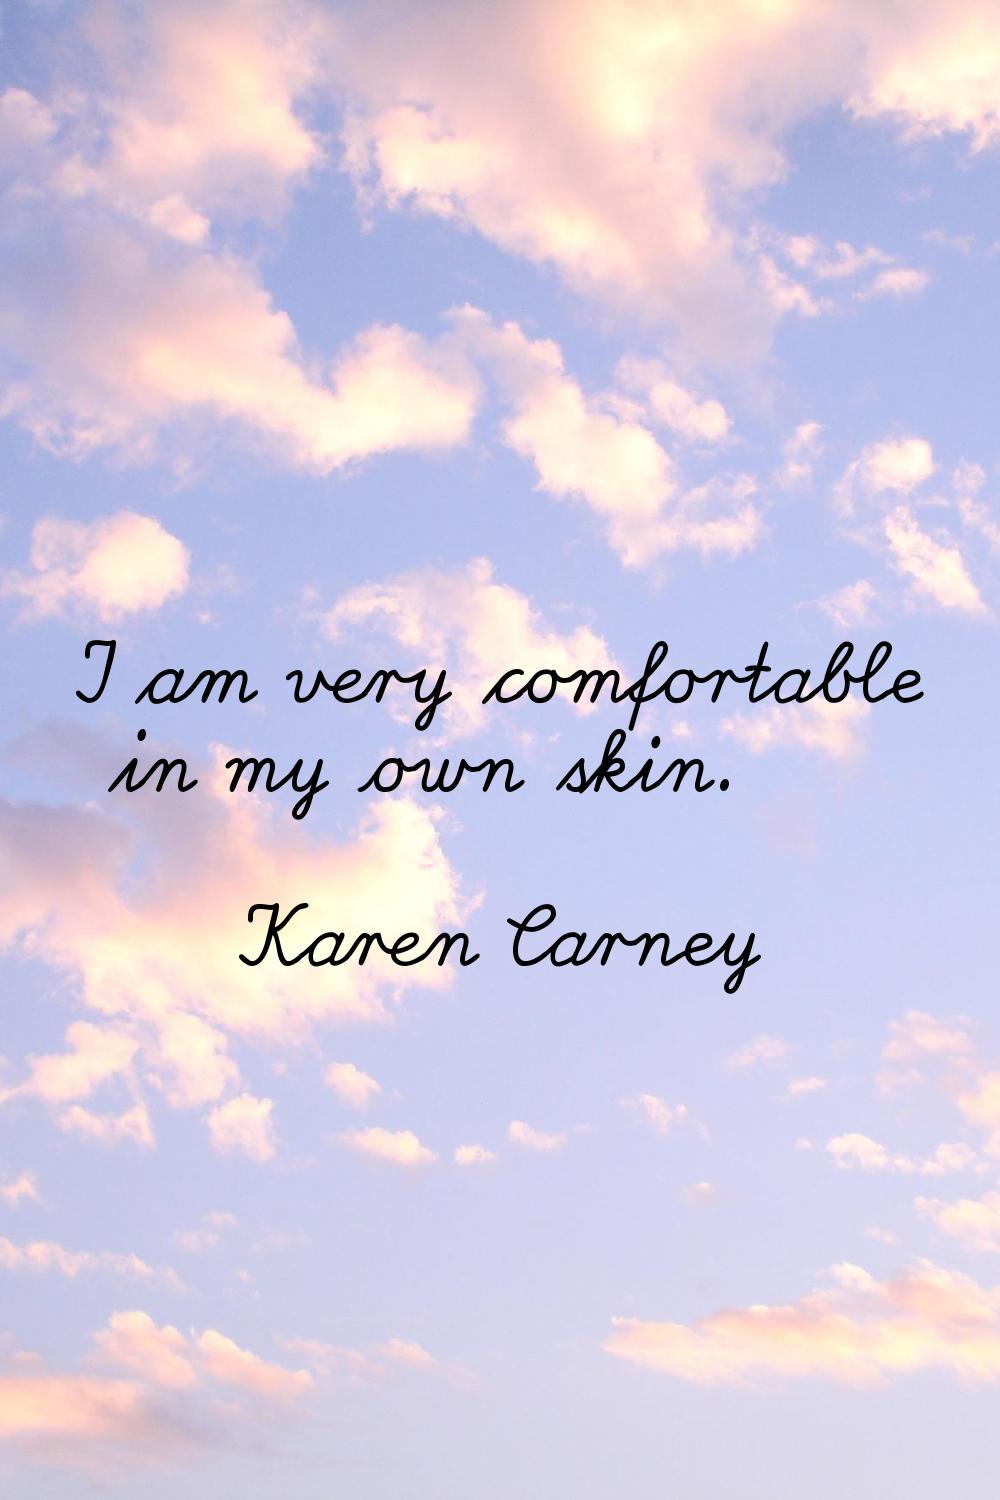 I am very comfortable in my own skin.